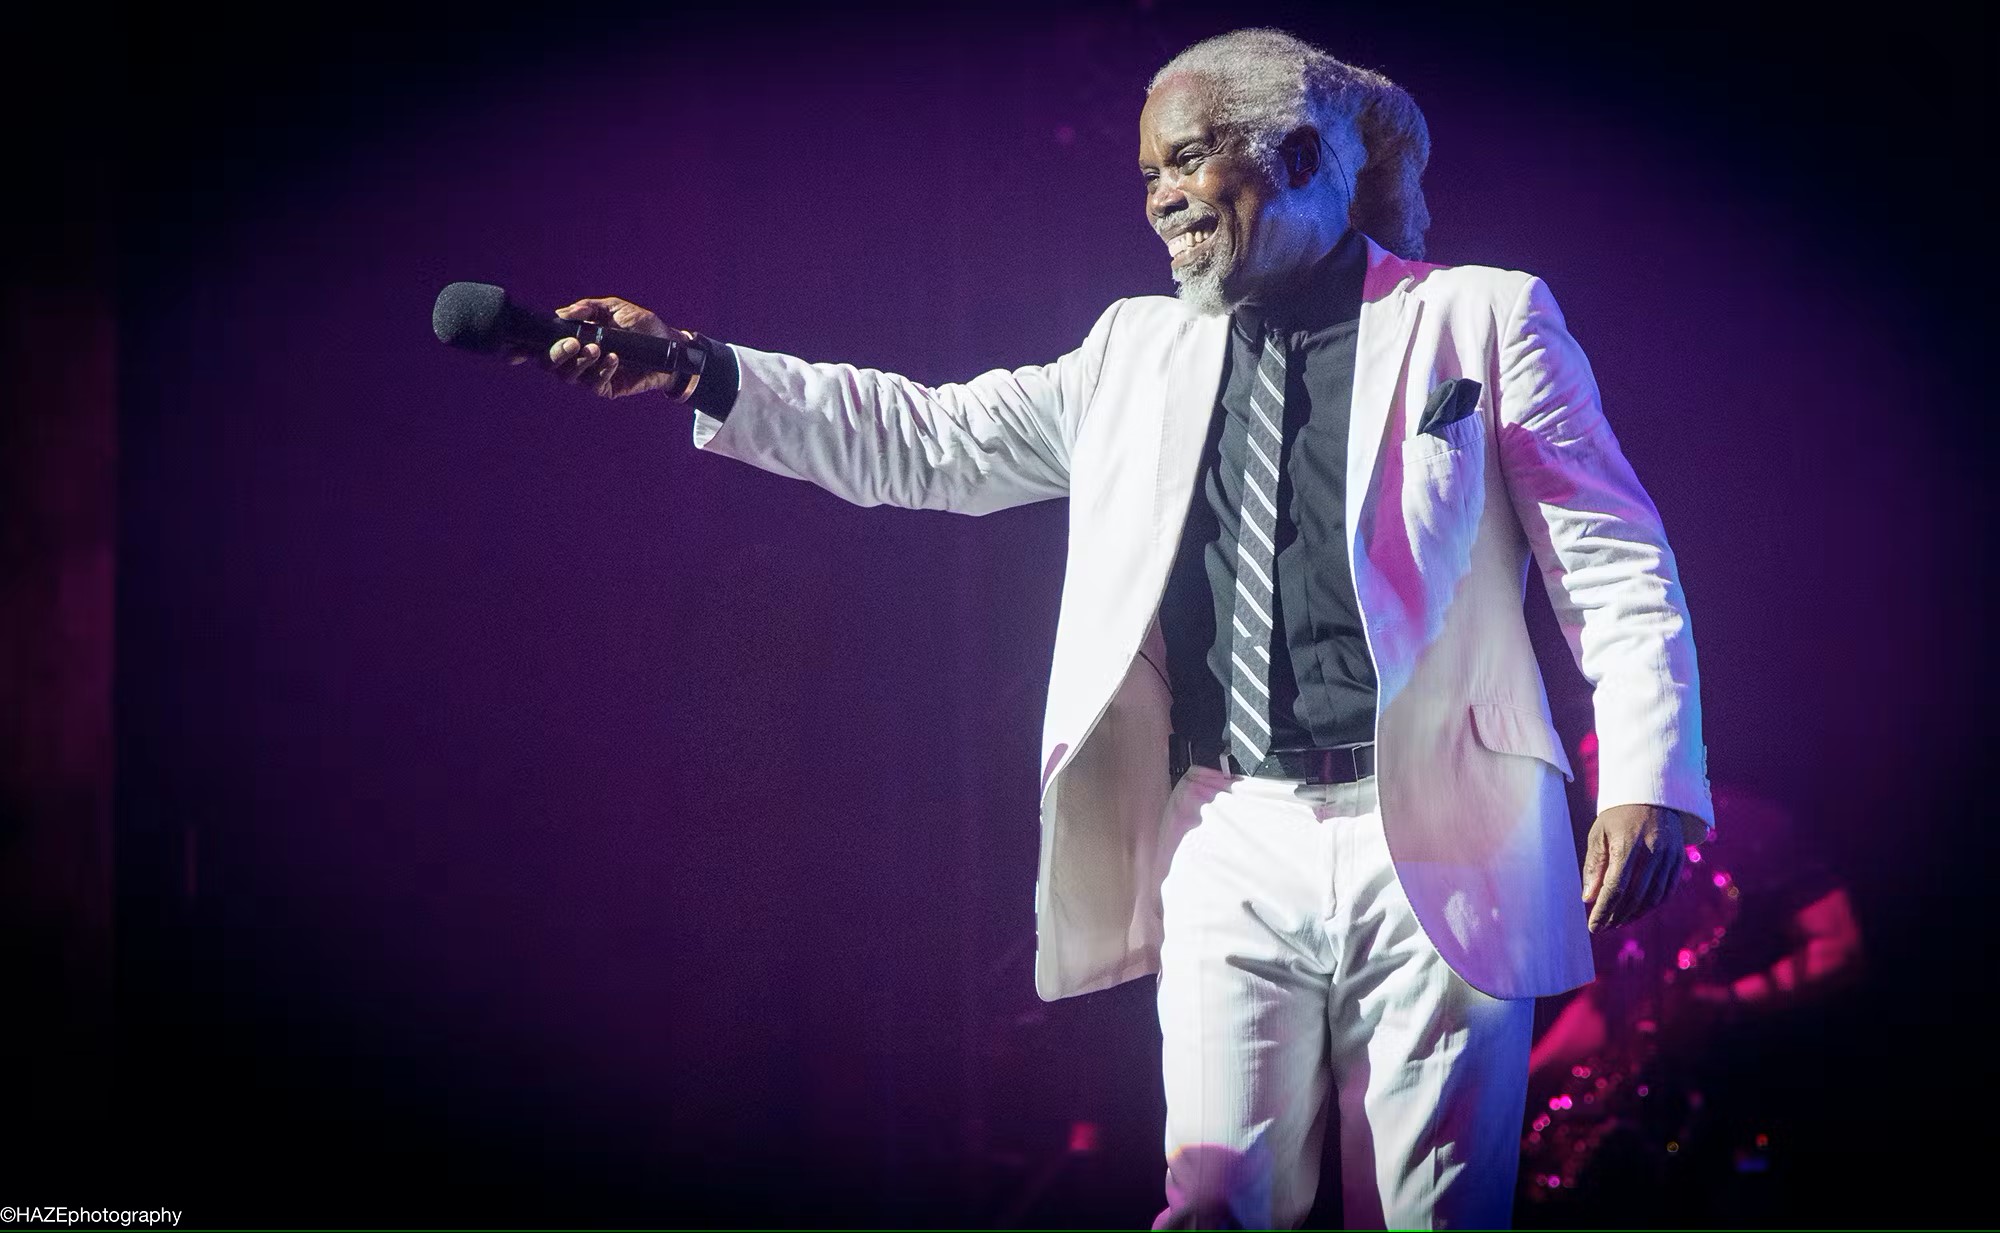 Billy Ocean on stage in white suit